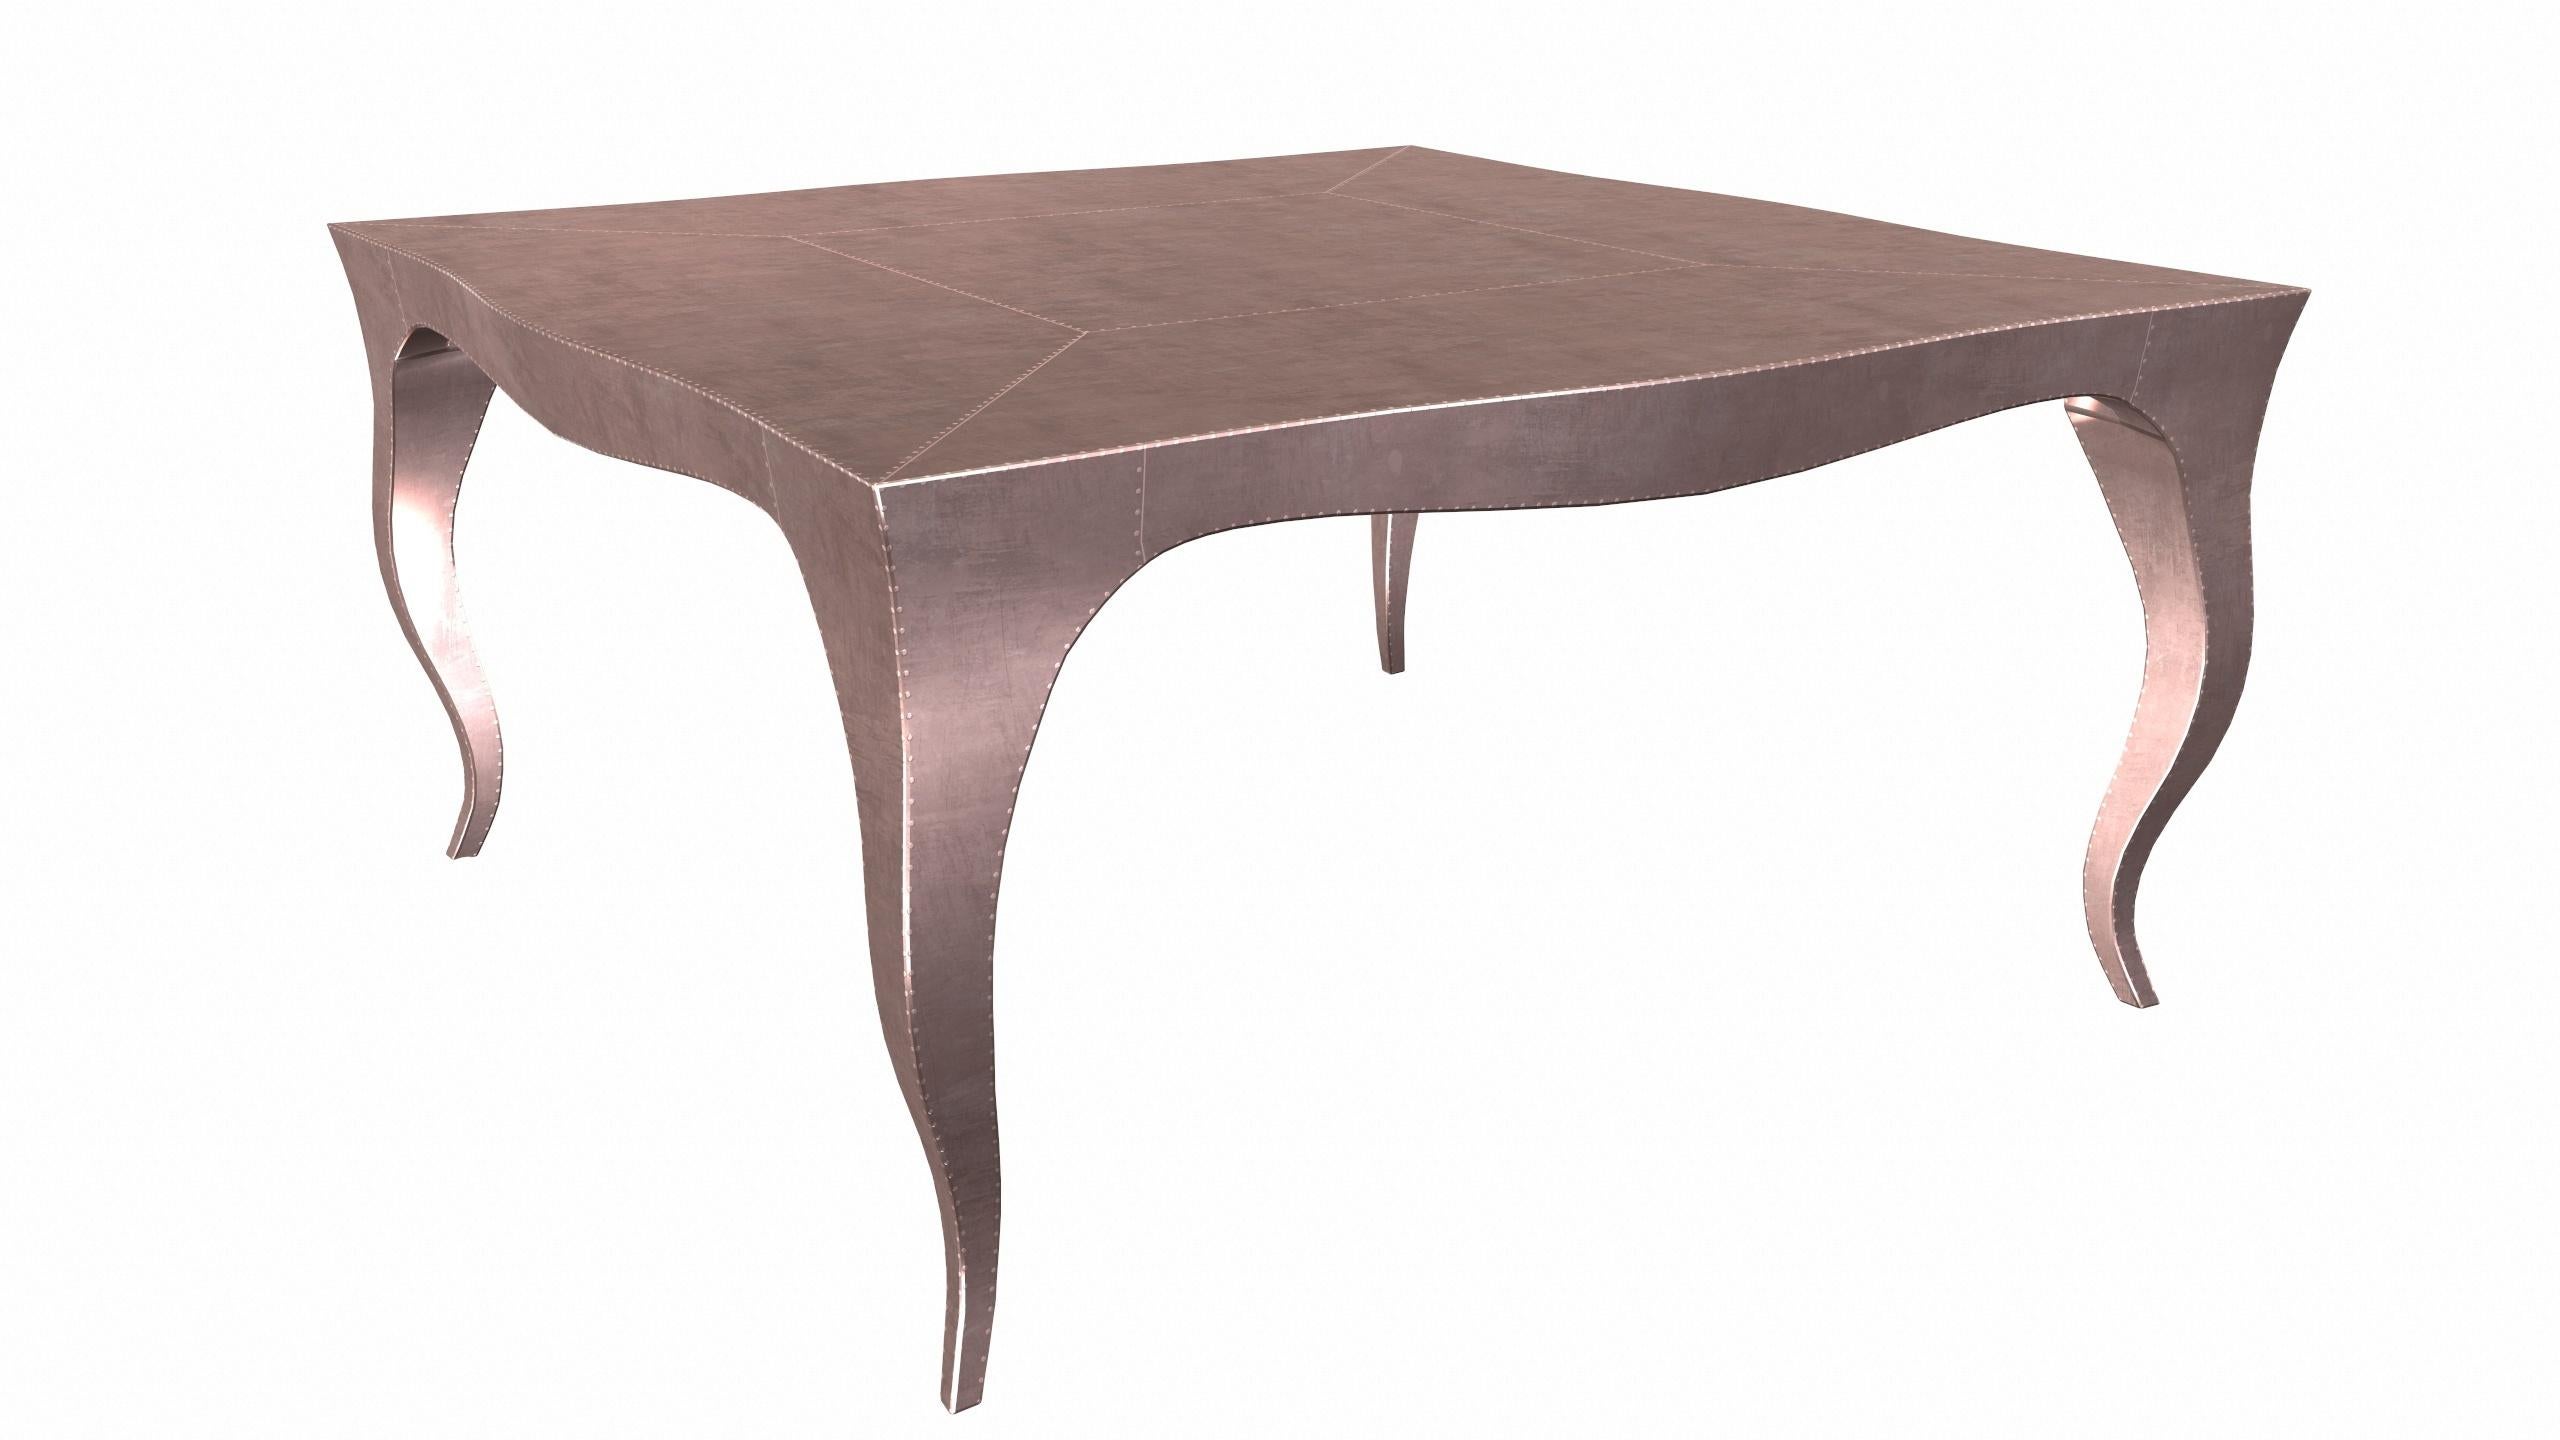 Louise Art Decor Nesting Tables Smooth Copper 18.5x18.5x10 inch by Paul M. In New Condition For Sale In New York, NY